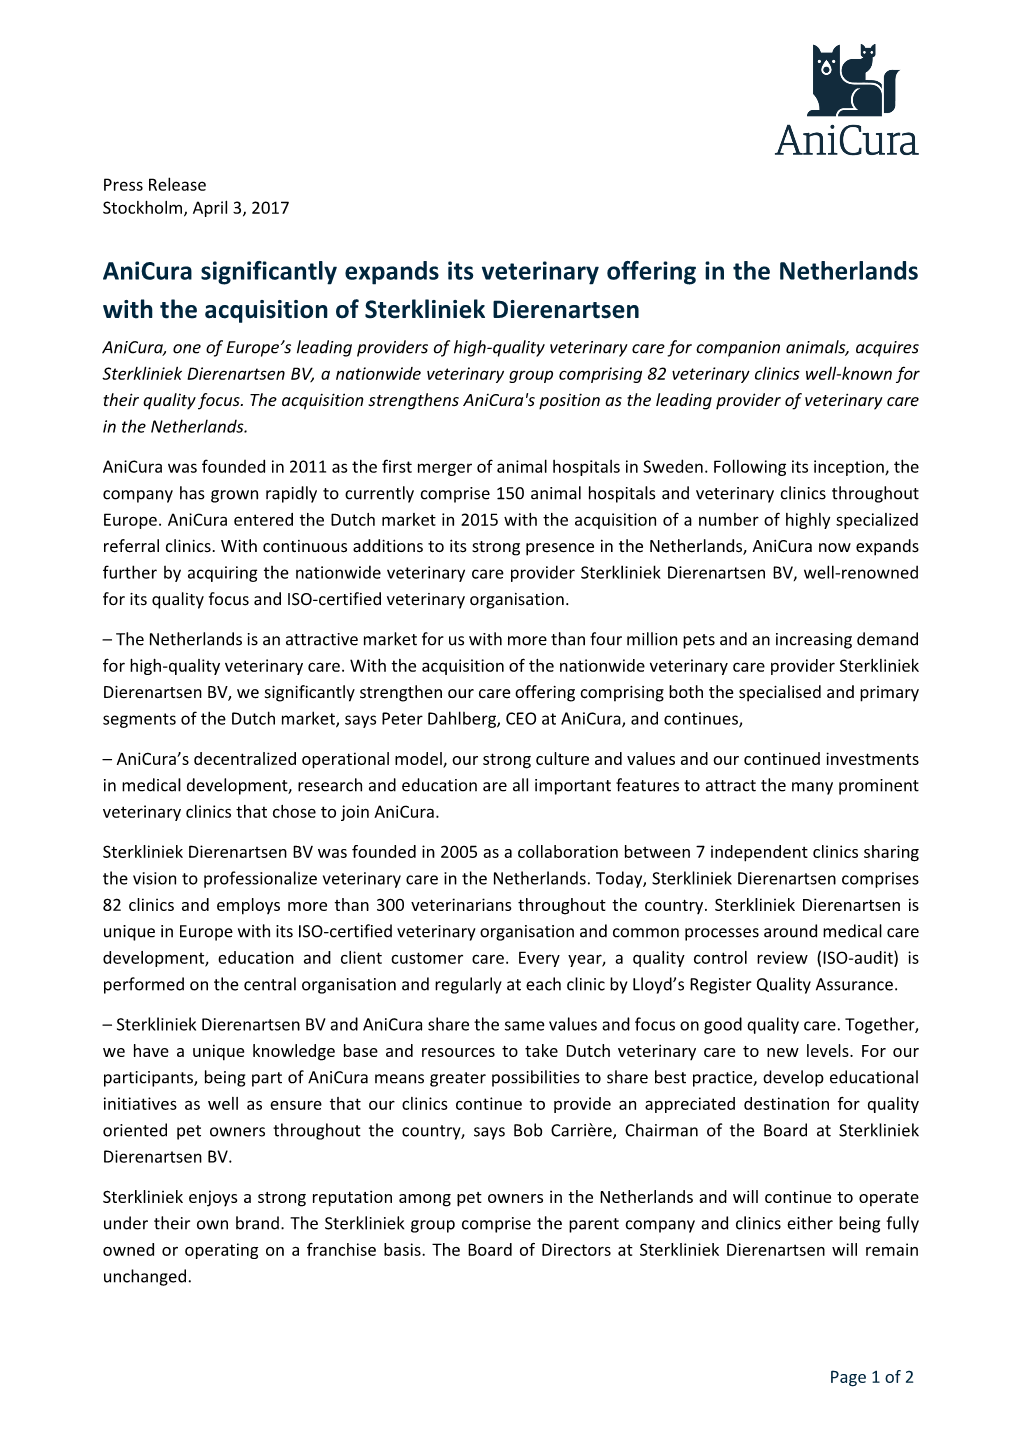 Anicura Significantly Expands Its Veterinary Offering in The